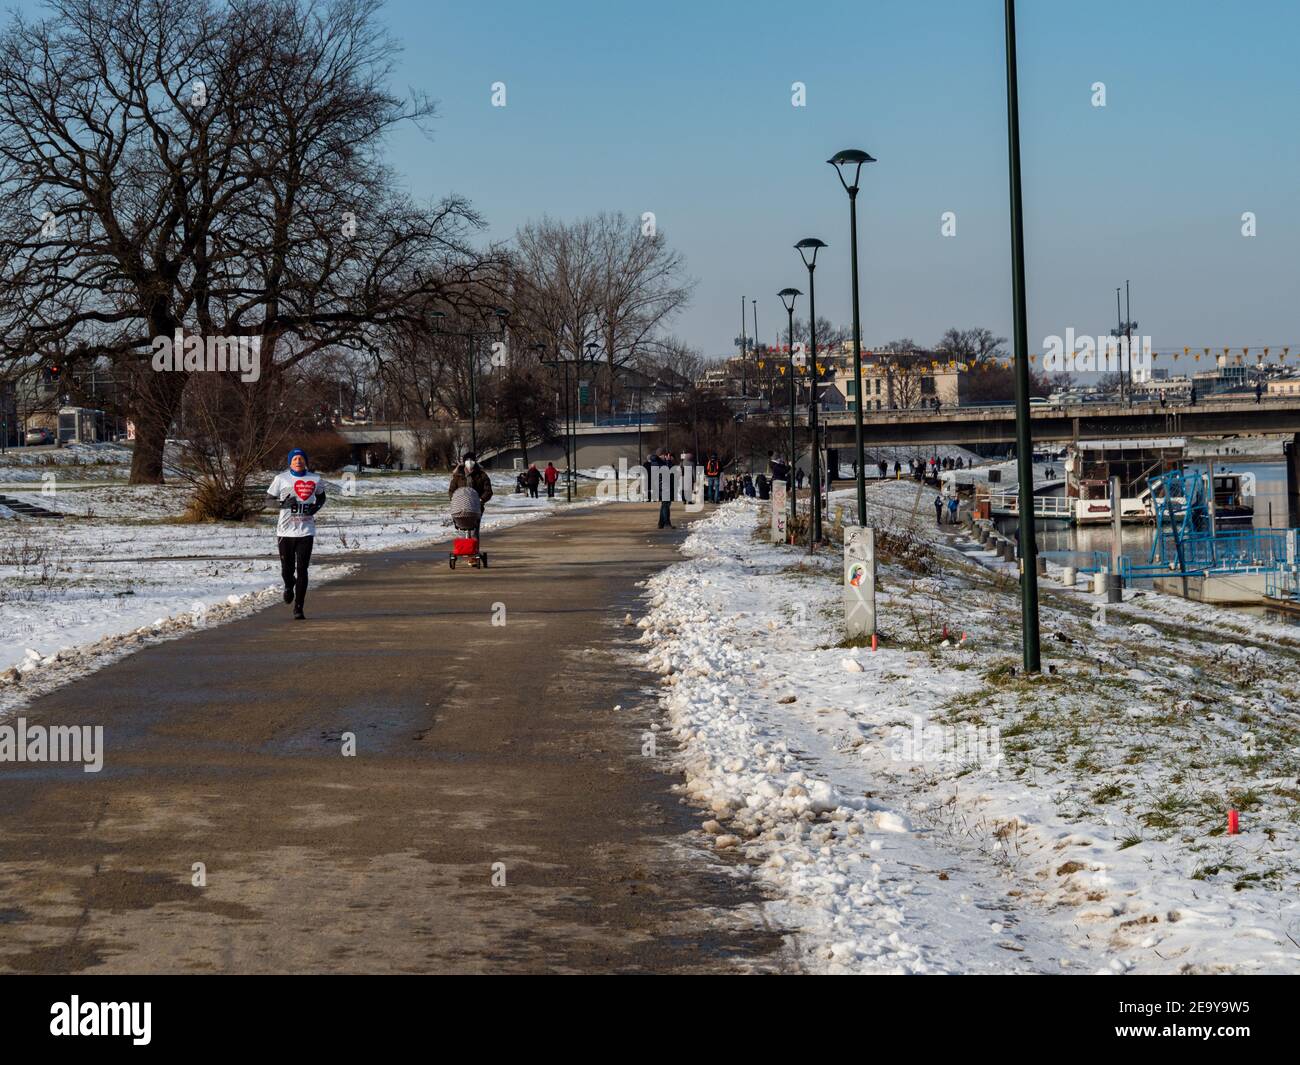 31/01/2021 - Poland Cracow. Vistula River boulevards. Winter cold day and people running or walking. Stock Photo